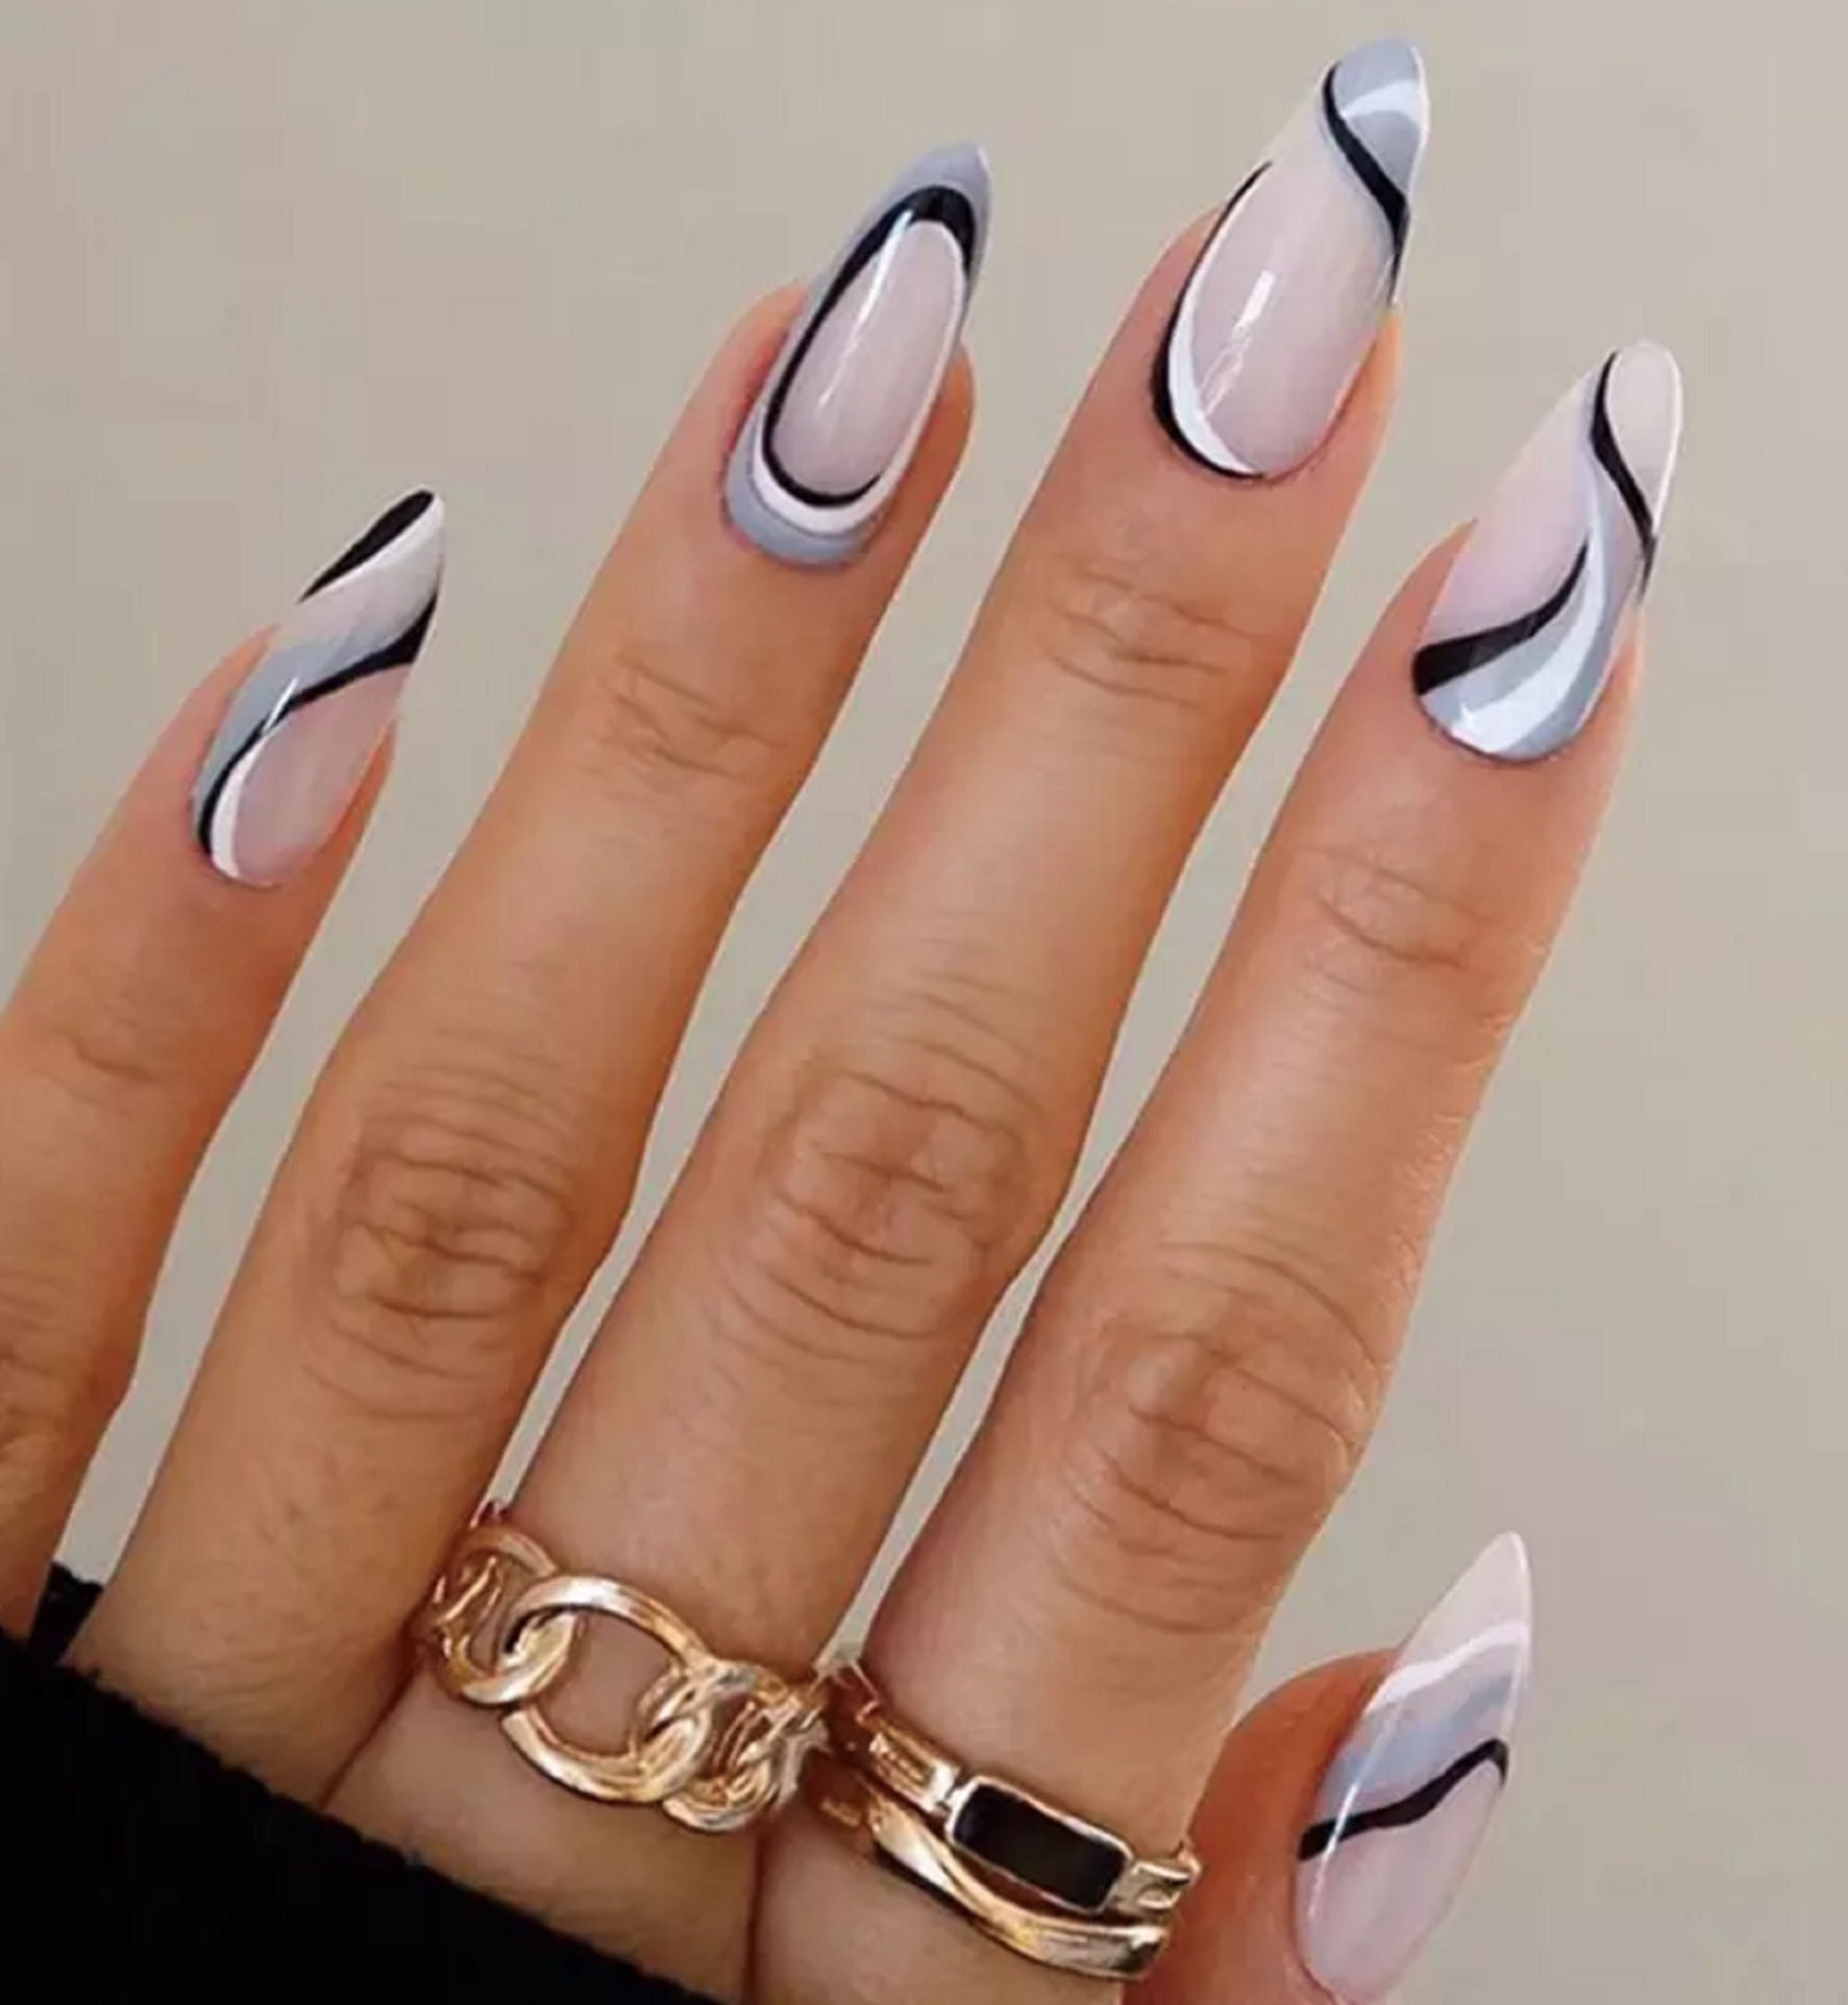 Unexpected French Manicure and French Tip Nail Designs to Try in 2023 |  Allure